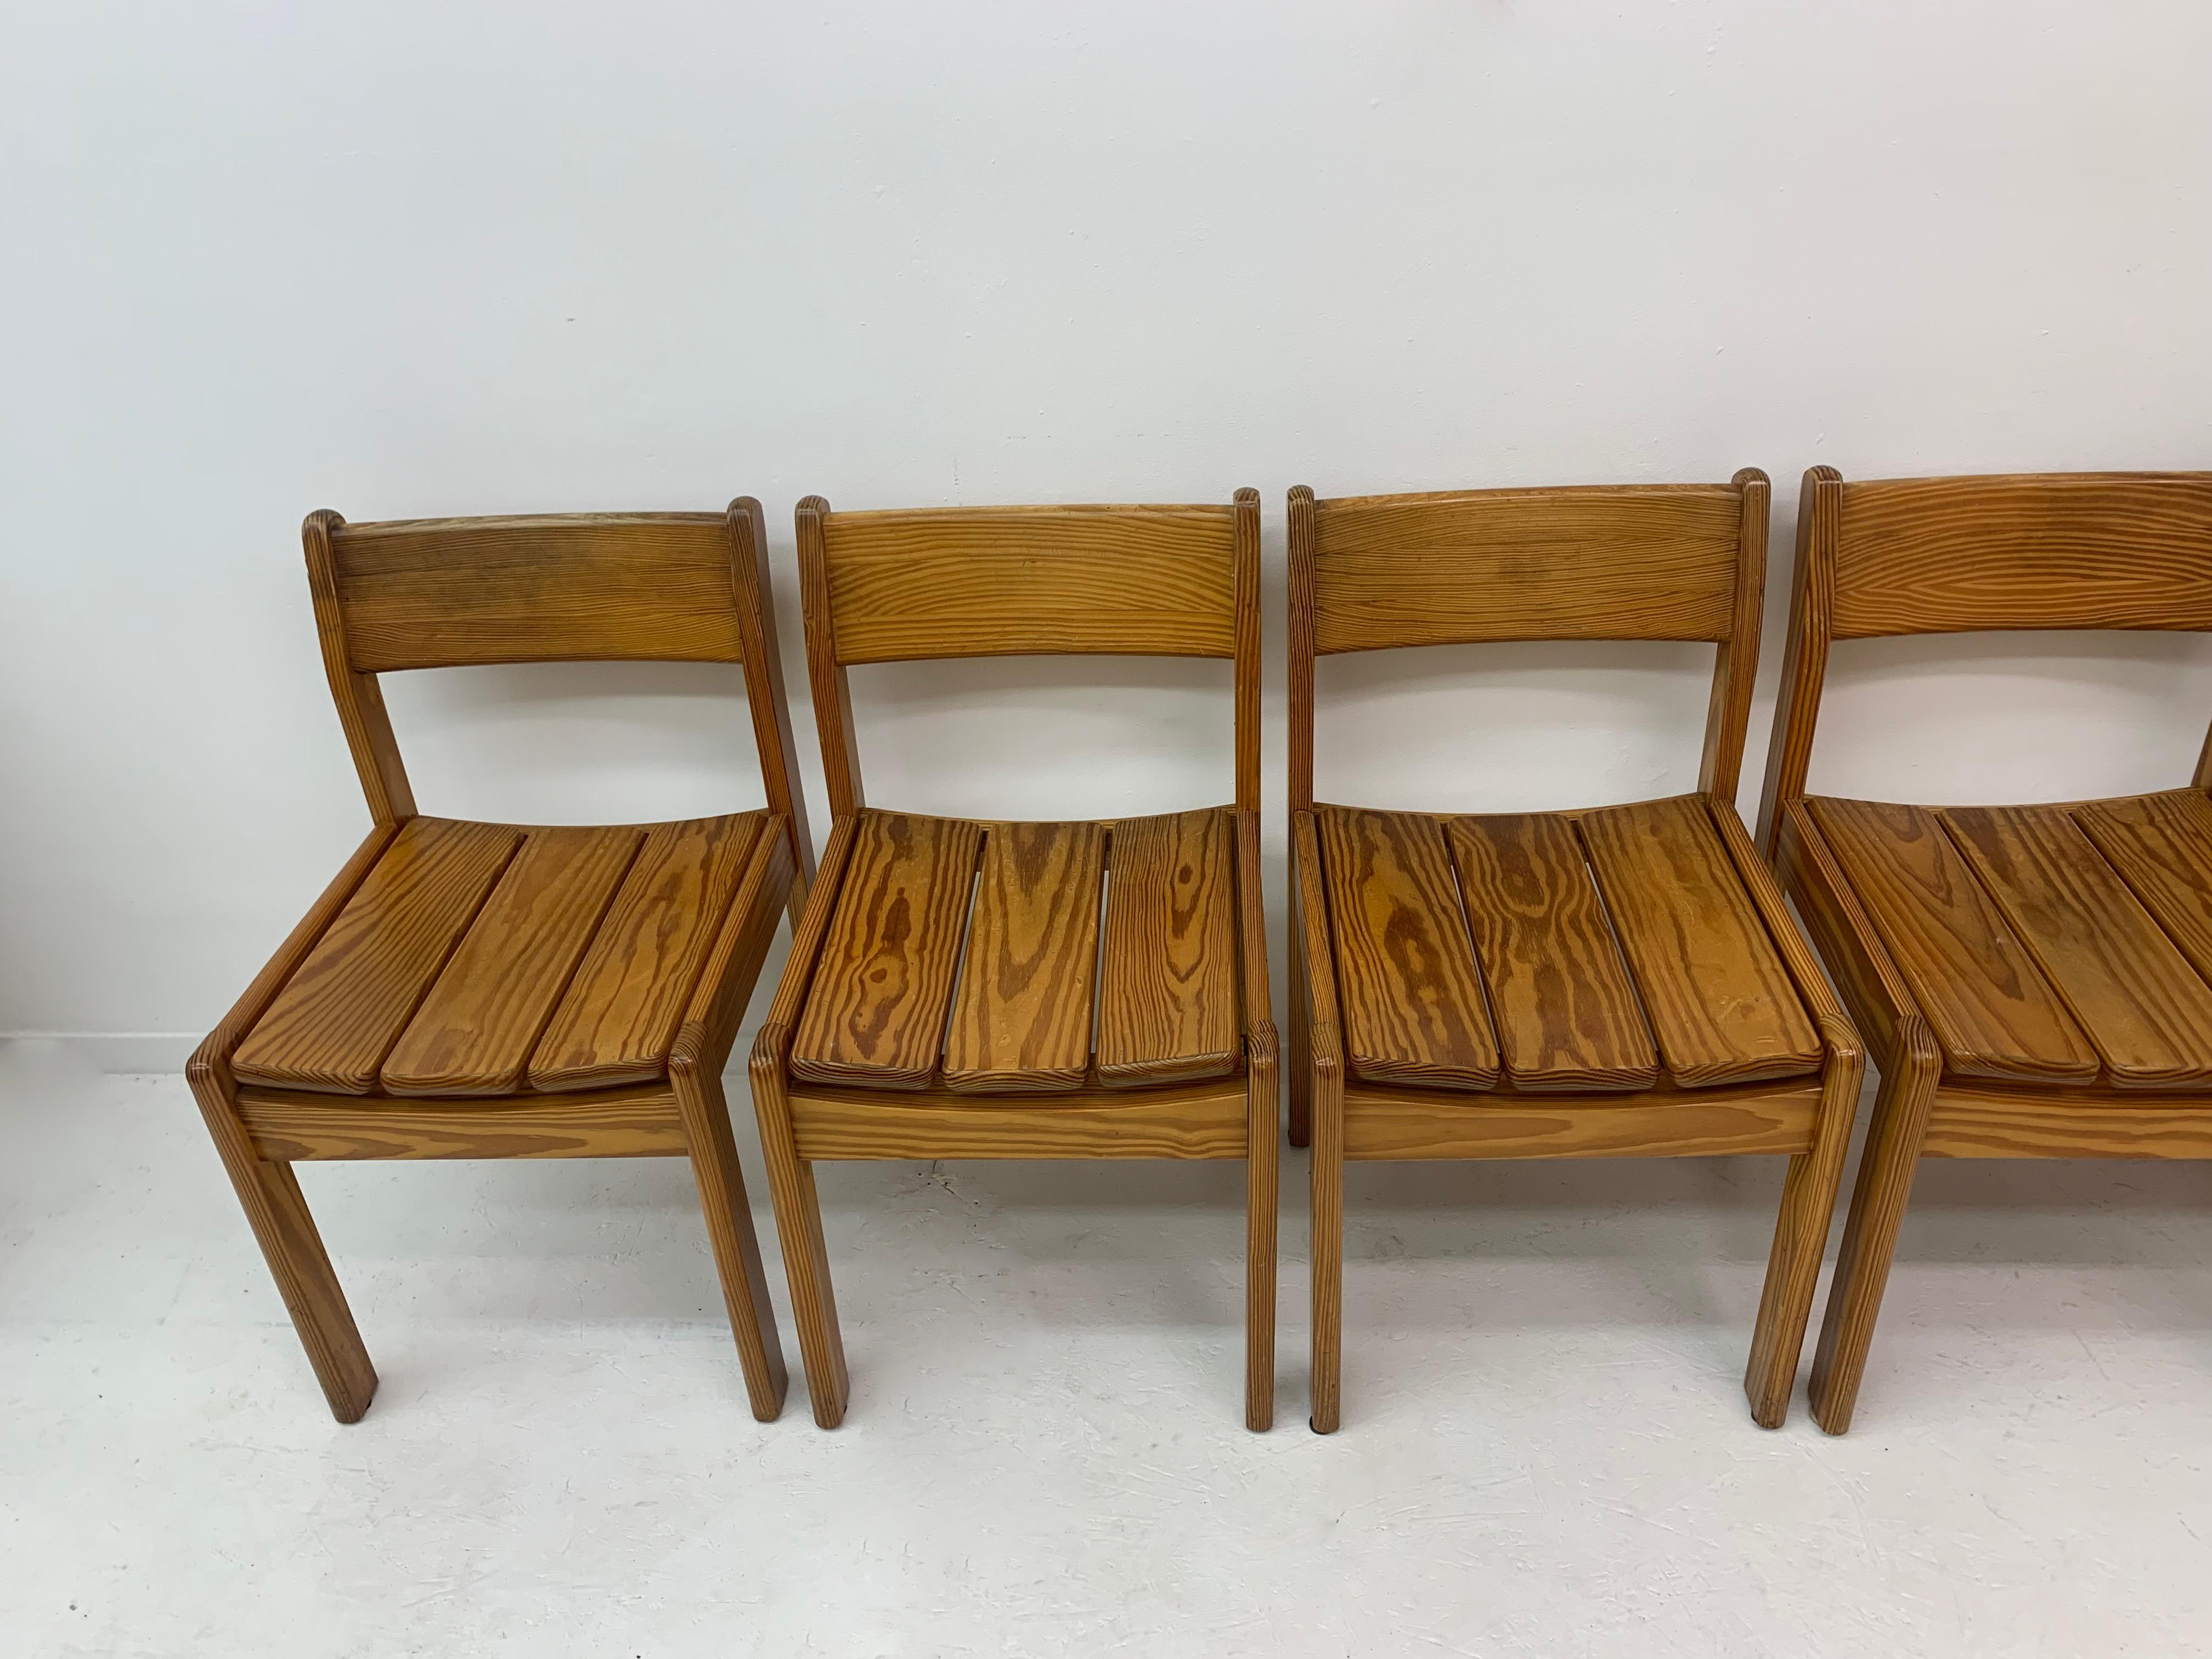 European Set of 6 Pine Wood Dining Chairs, 1970’s For Sale